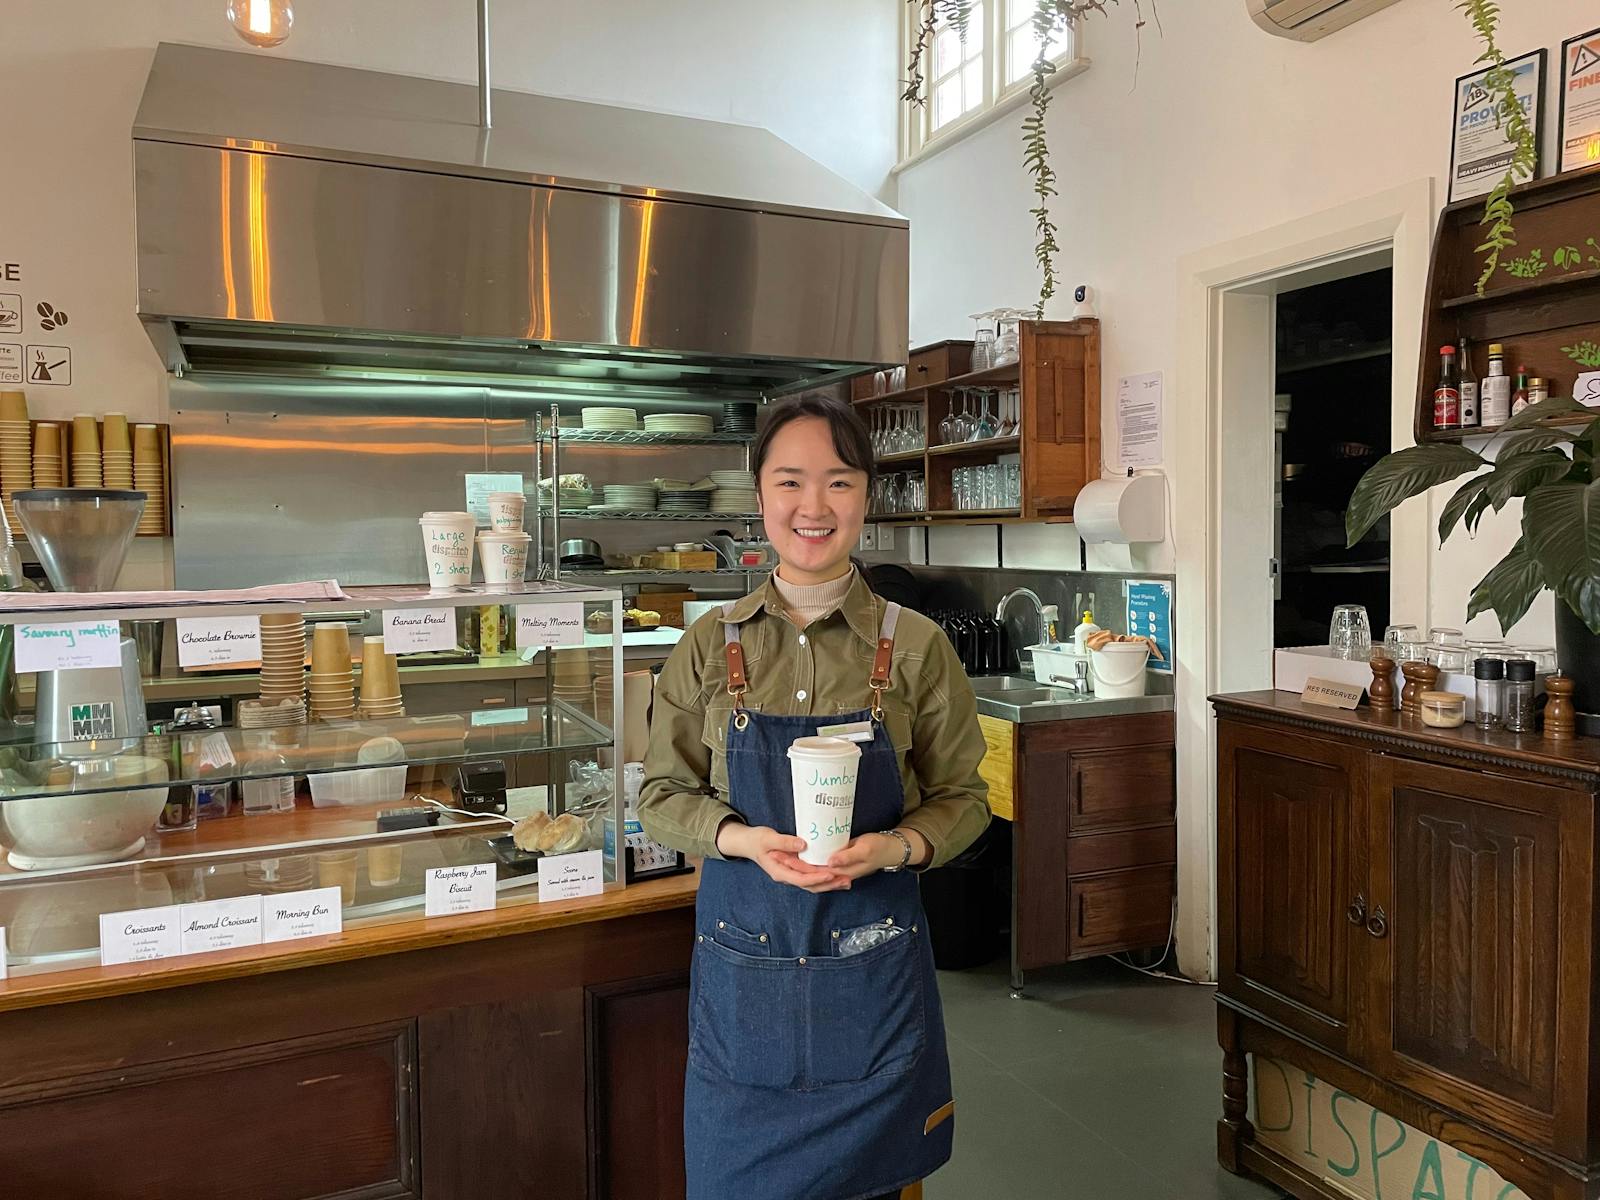 The Dispatch Cafe is on ground level, run by Ellen Yang. Takeaways are available from Dispatch & Go.